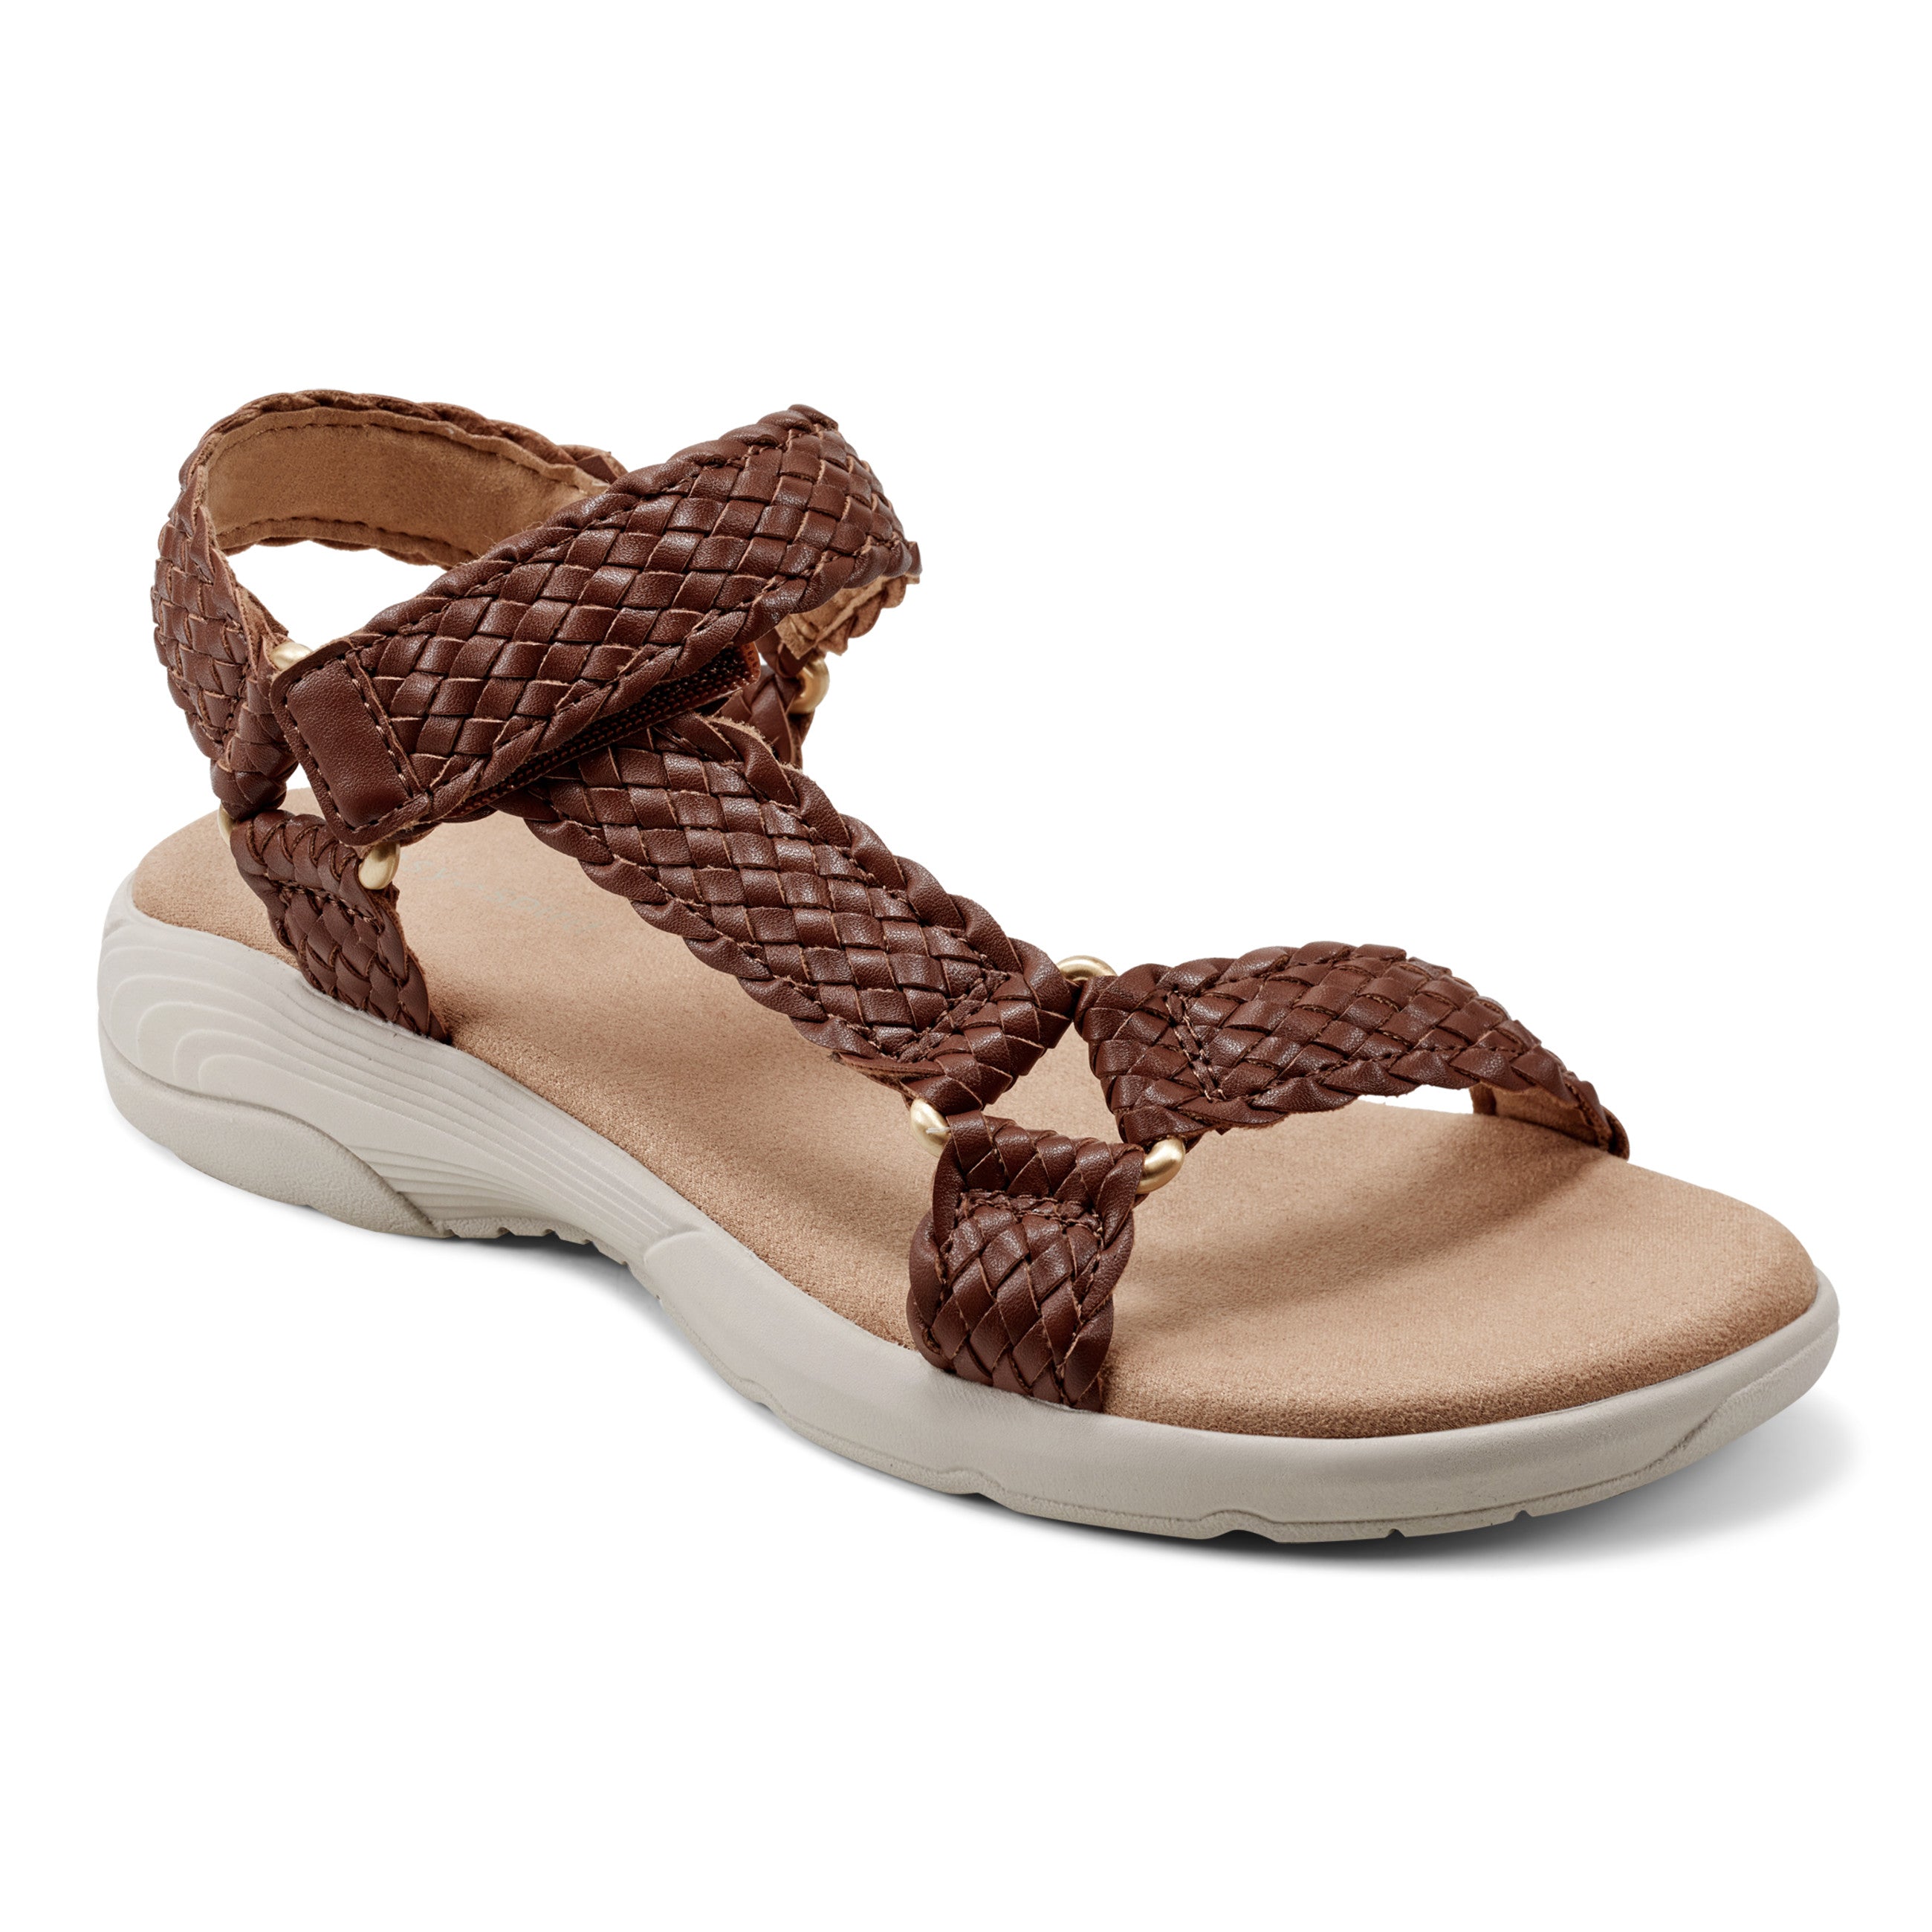 Taytum Round Toe Strappy Casual Sandals